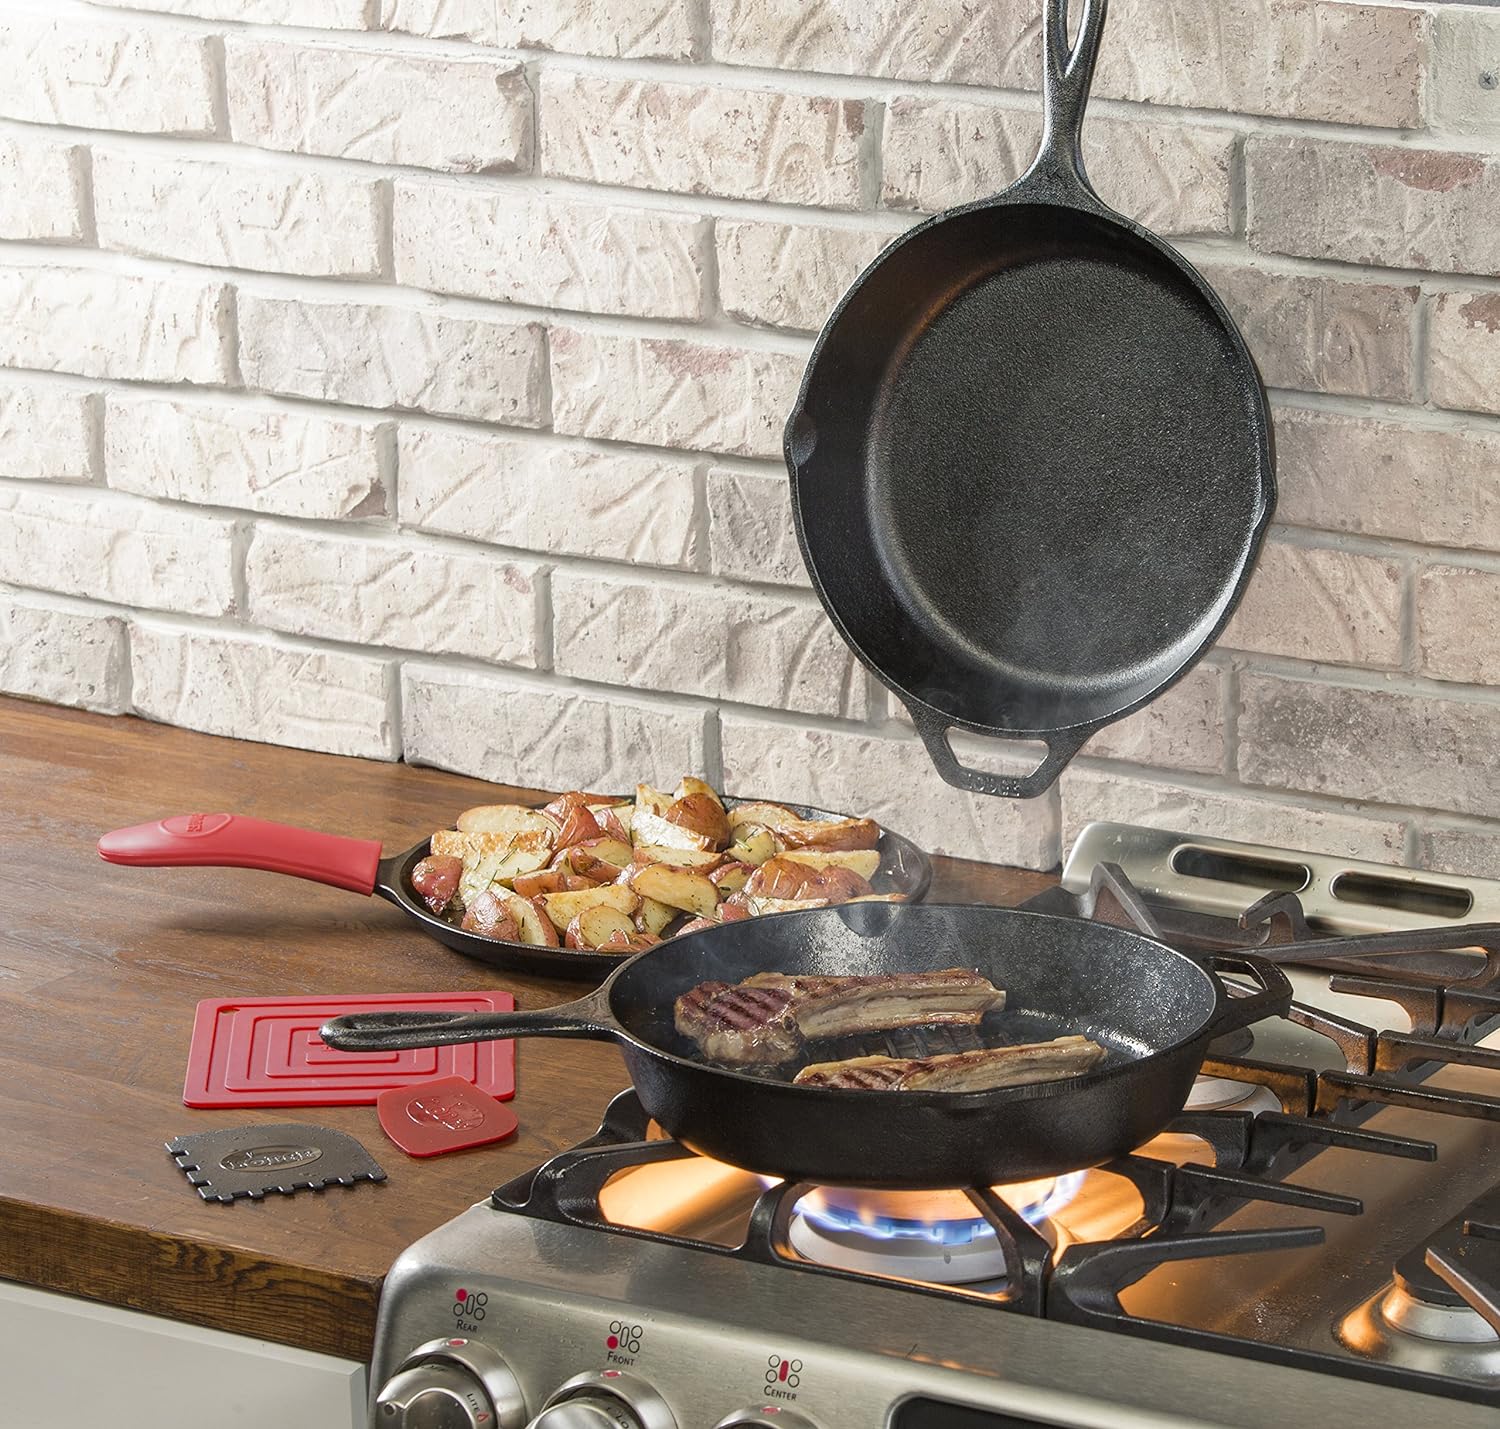 Cast Iron Frying Pan Feature